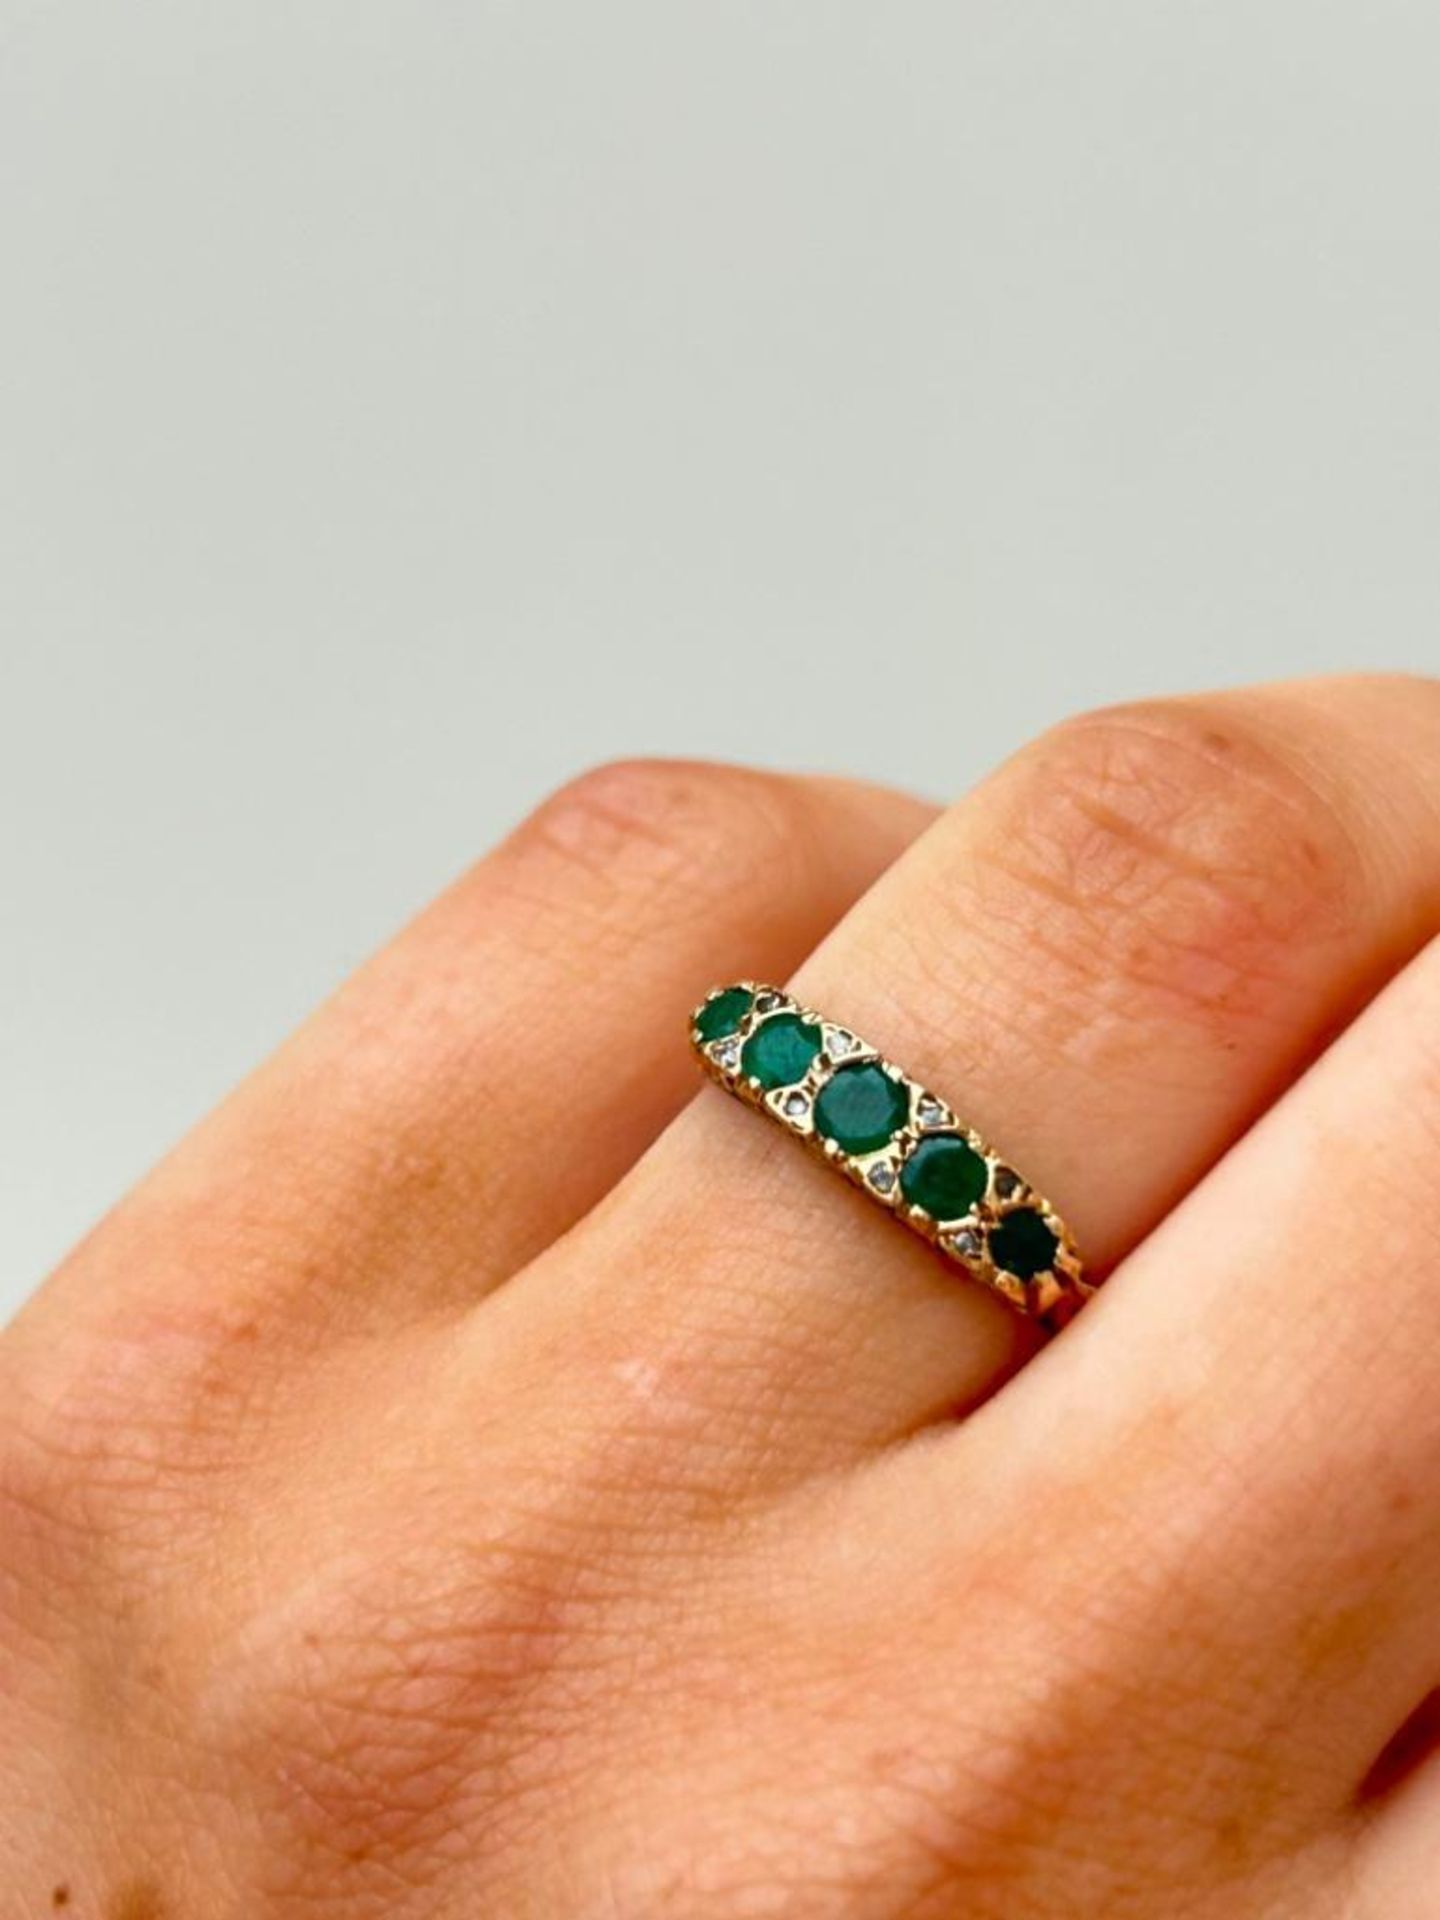 18ct Yellow Gold Emerald 5 Stone Ring with Diamond Points - Image 2 of 8